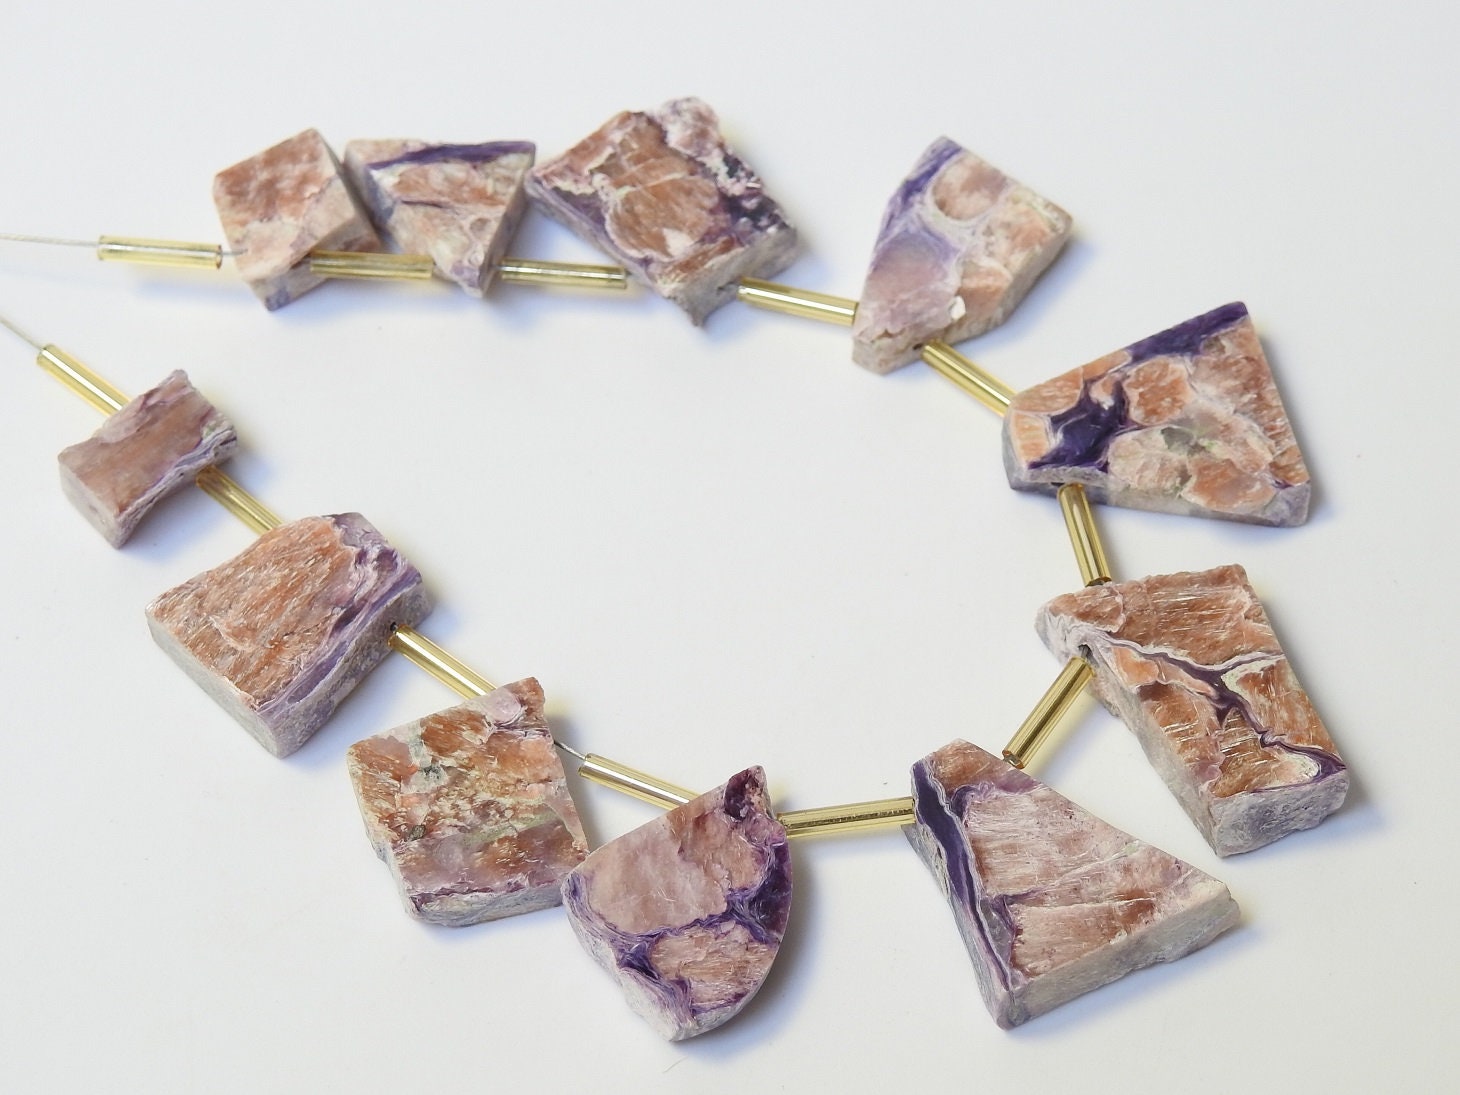 Charoite Polished Rough Slice,Slab,Stick,Loose Raw,11Pieces Strand 20X15To11X11MM Approx,Wholesaler,Supplies,100%Natural PME-R4 | Save 33% - Rajasthan Living 14